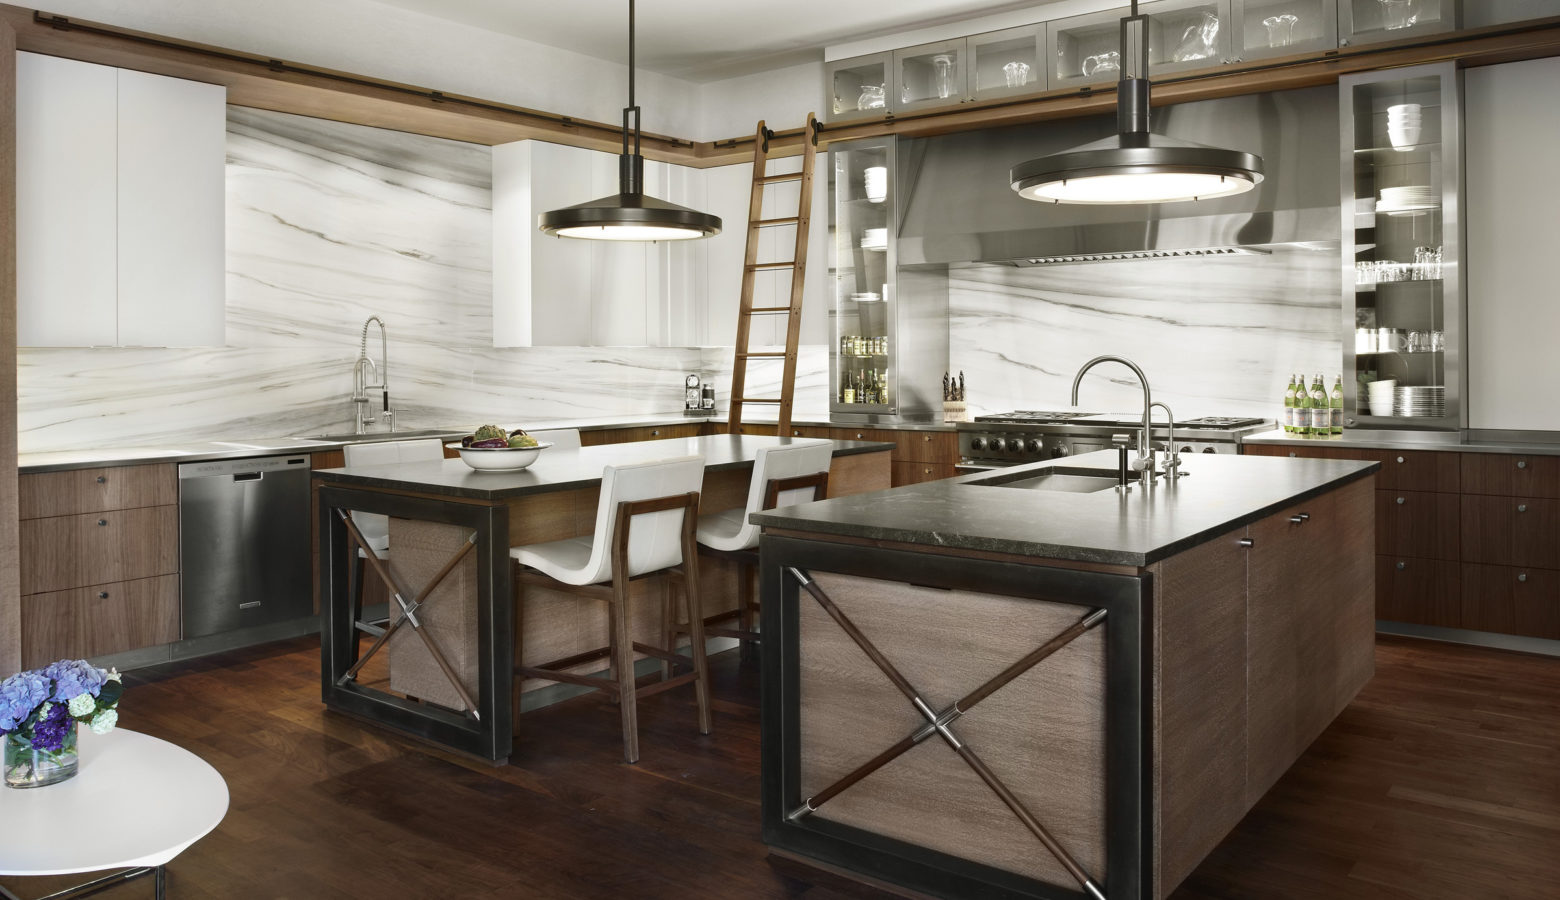 Super Pantries, the Newest Trend in North Shore Kitchen Design